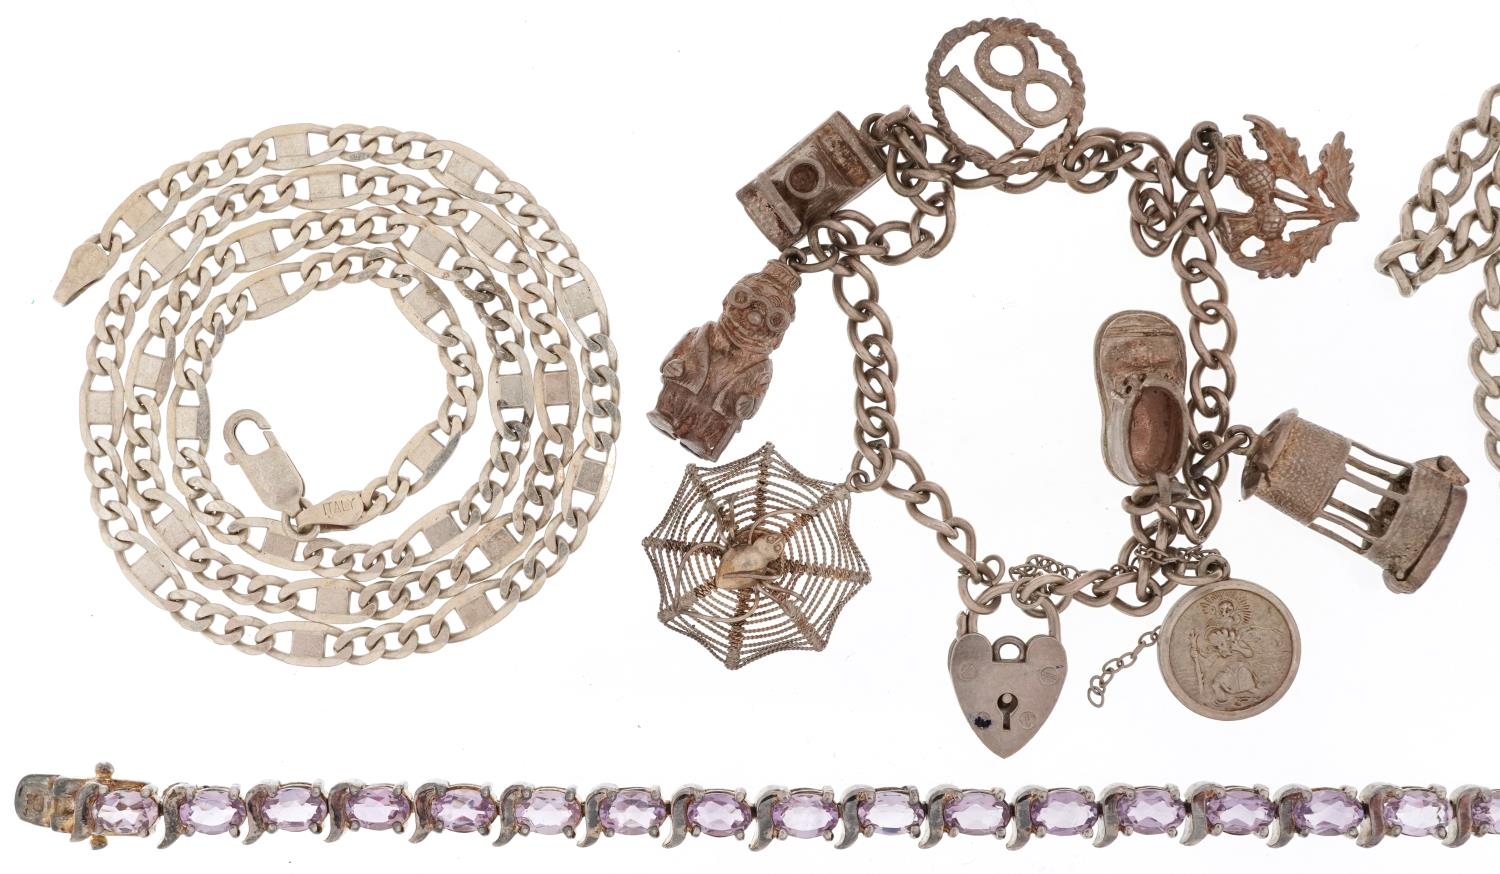 Silver jewellery comprising two necklaces, charm bracelet with a collection of charms and an - Image 2 of 5